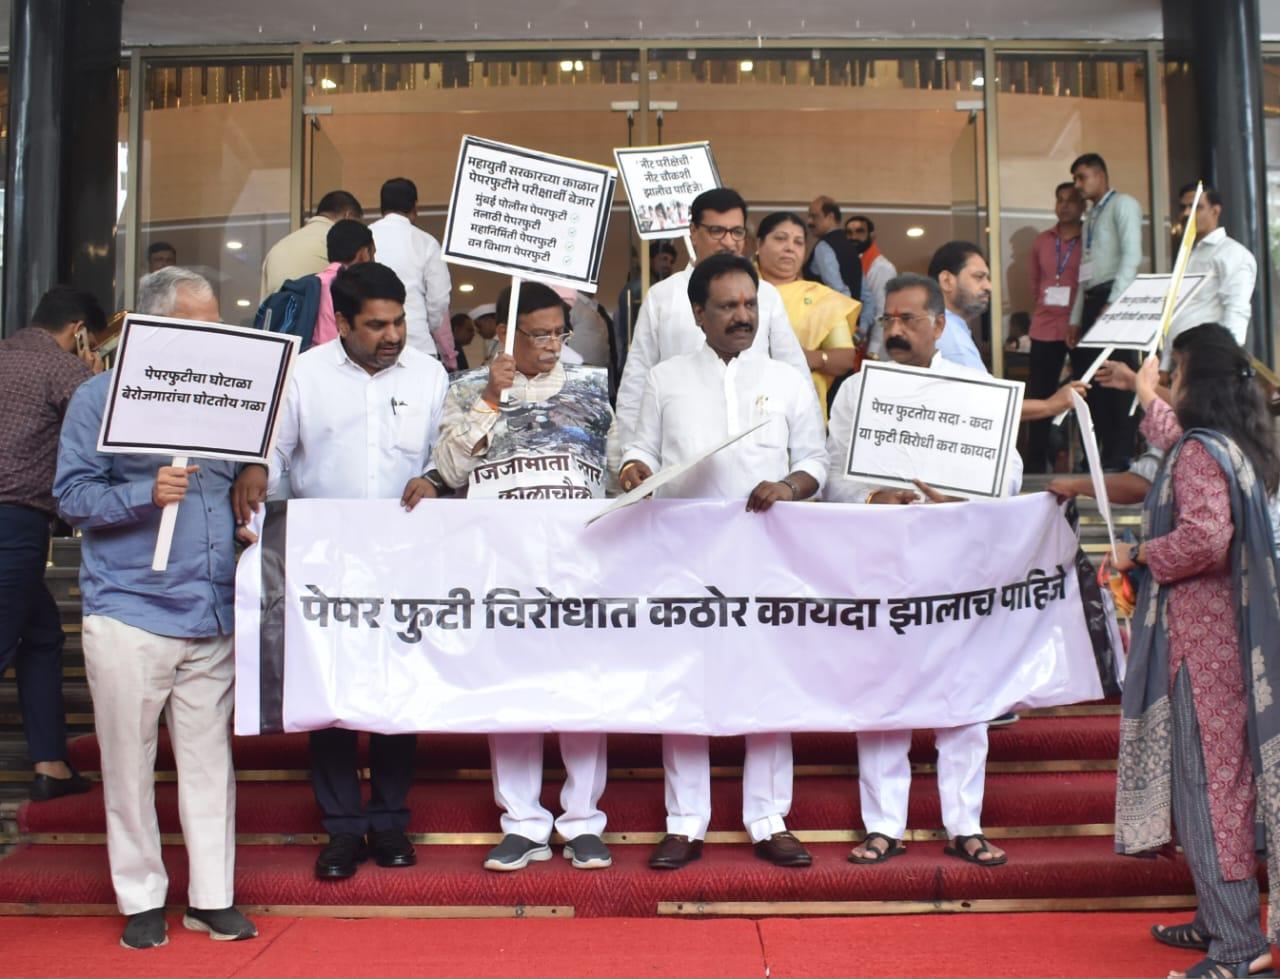 The Opposition leaders raised slogans demanding a strict law to curb paper leaks and punish the guilty